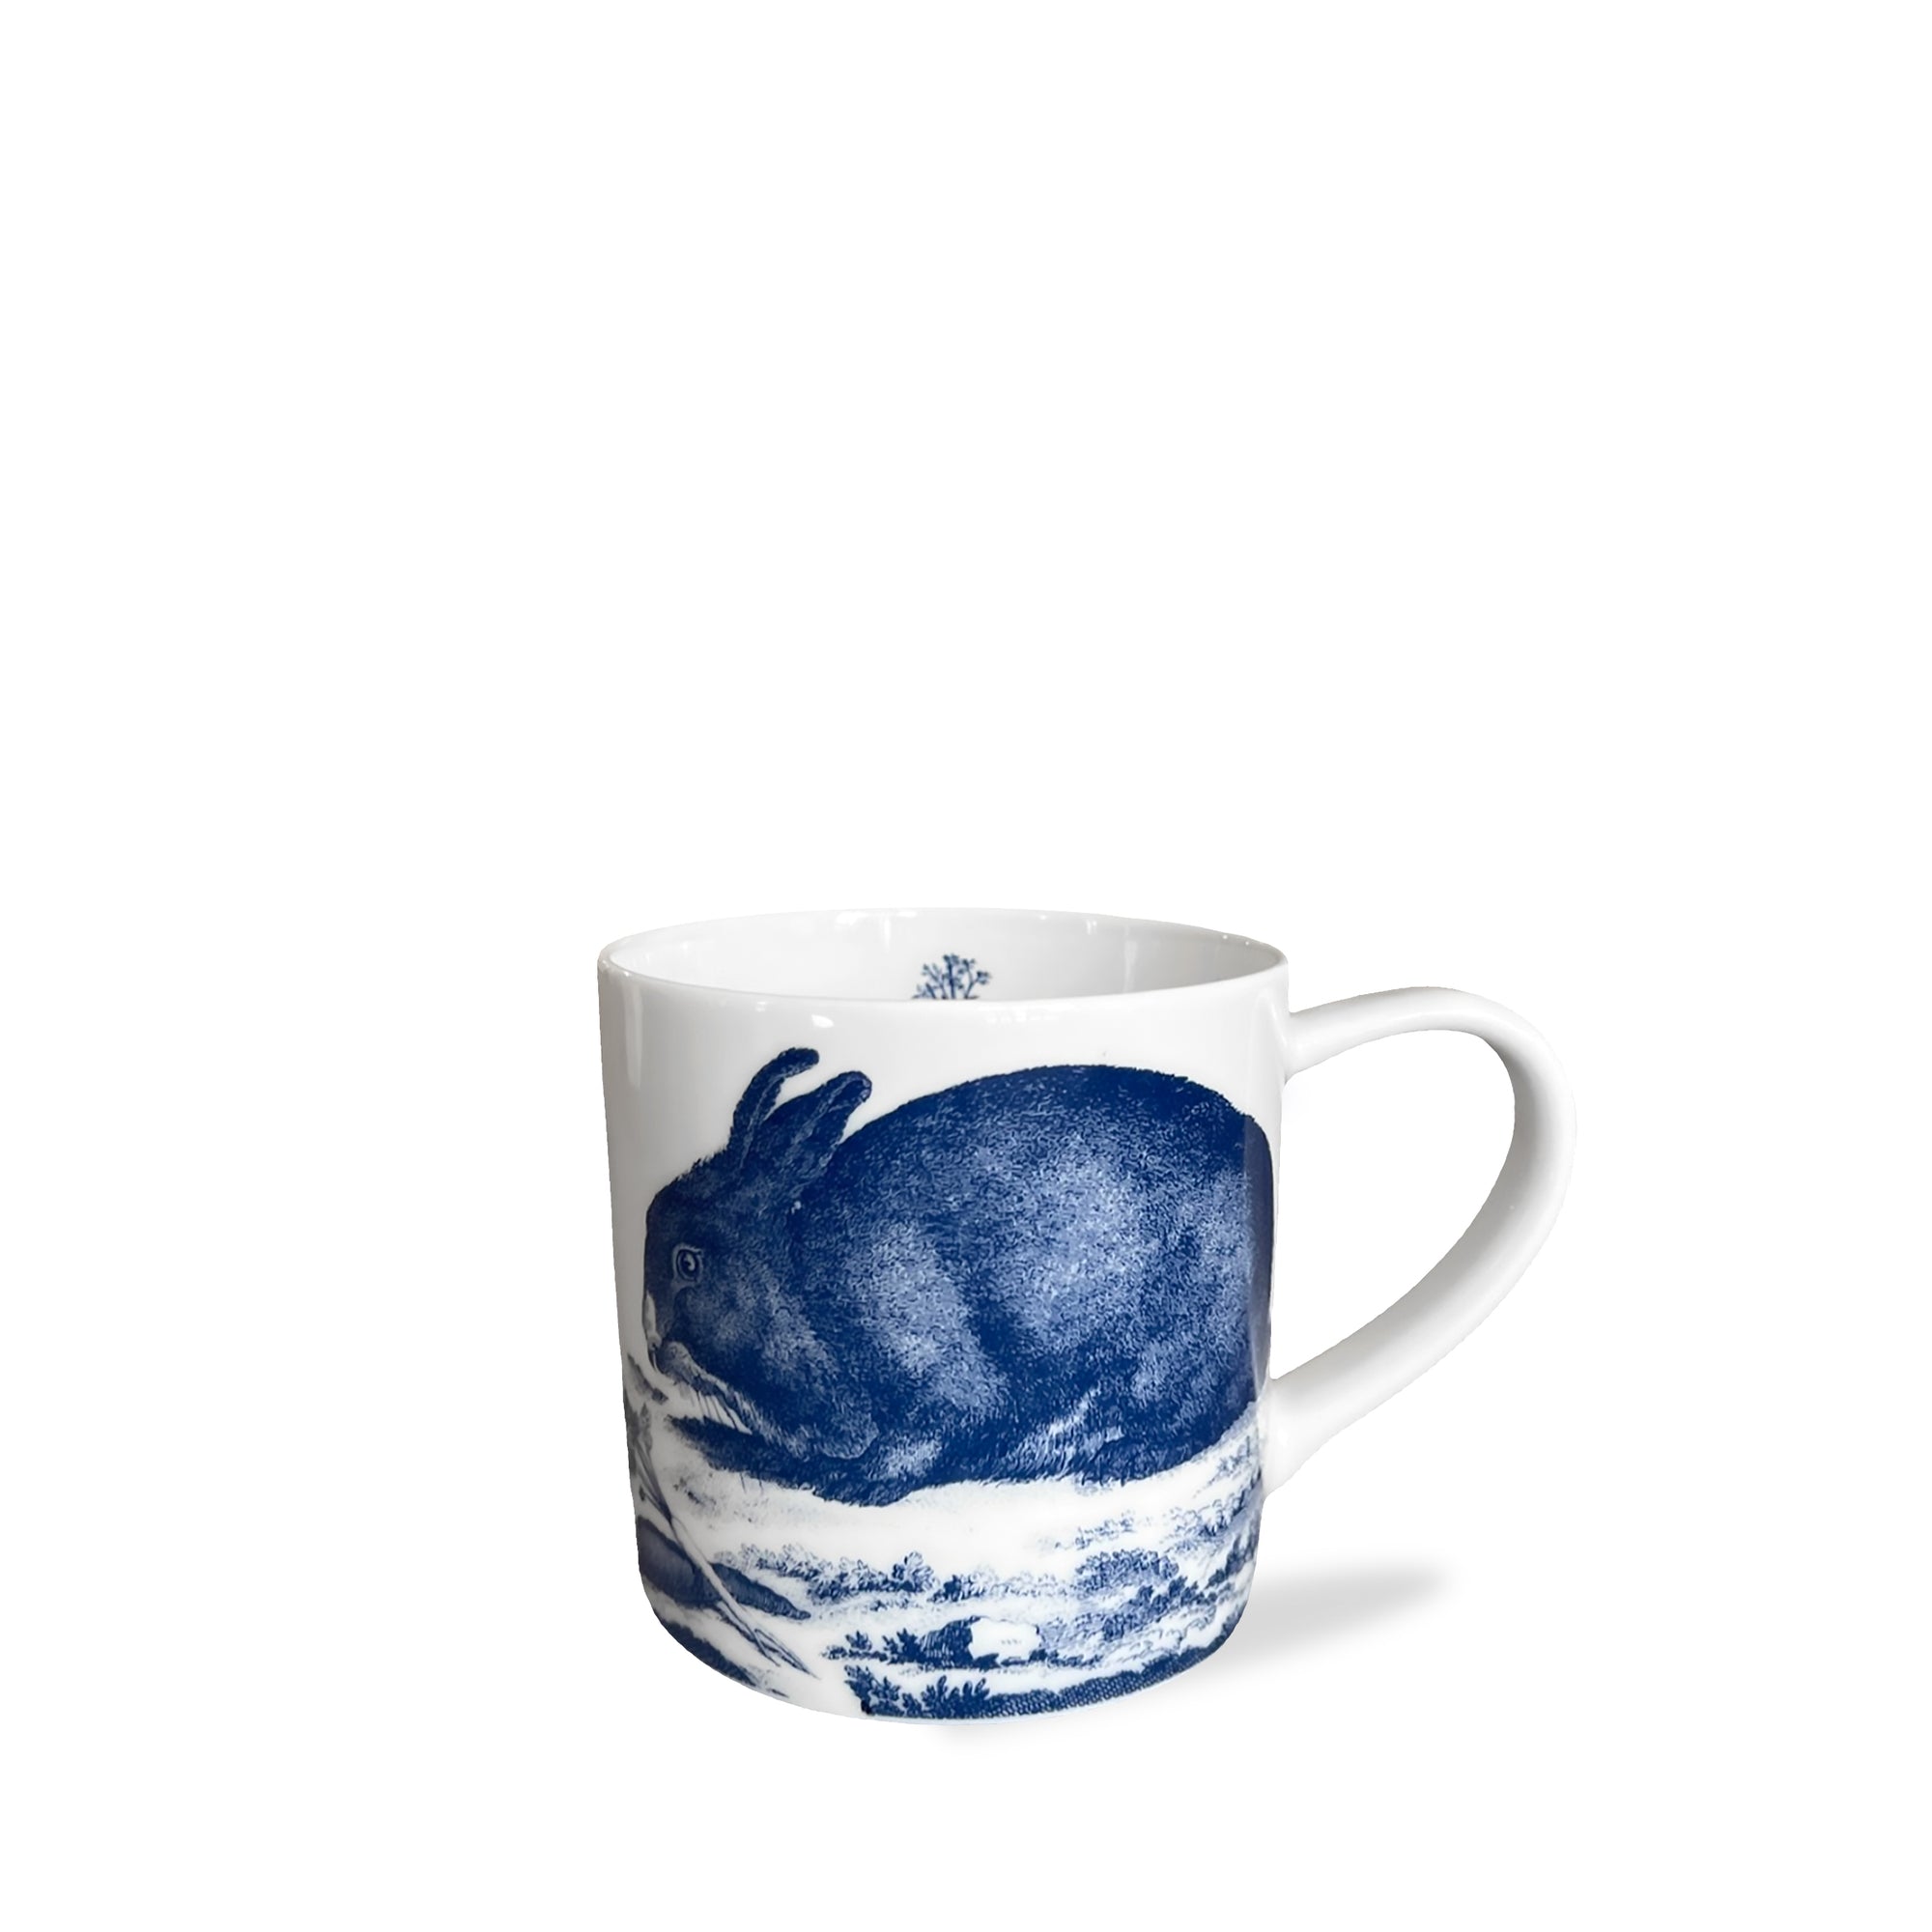 This high-fired porcelain Bunnies Mug from Caskata Artisanal Home features a blue illustration of a rabbit against a nature scene background, making it the perfect Spring-inspired mug for your collection.